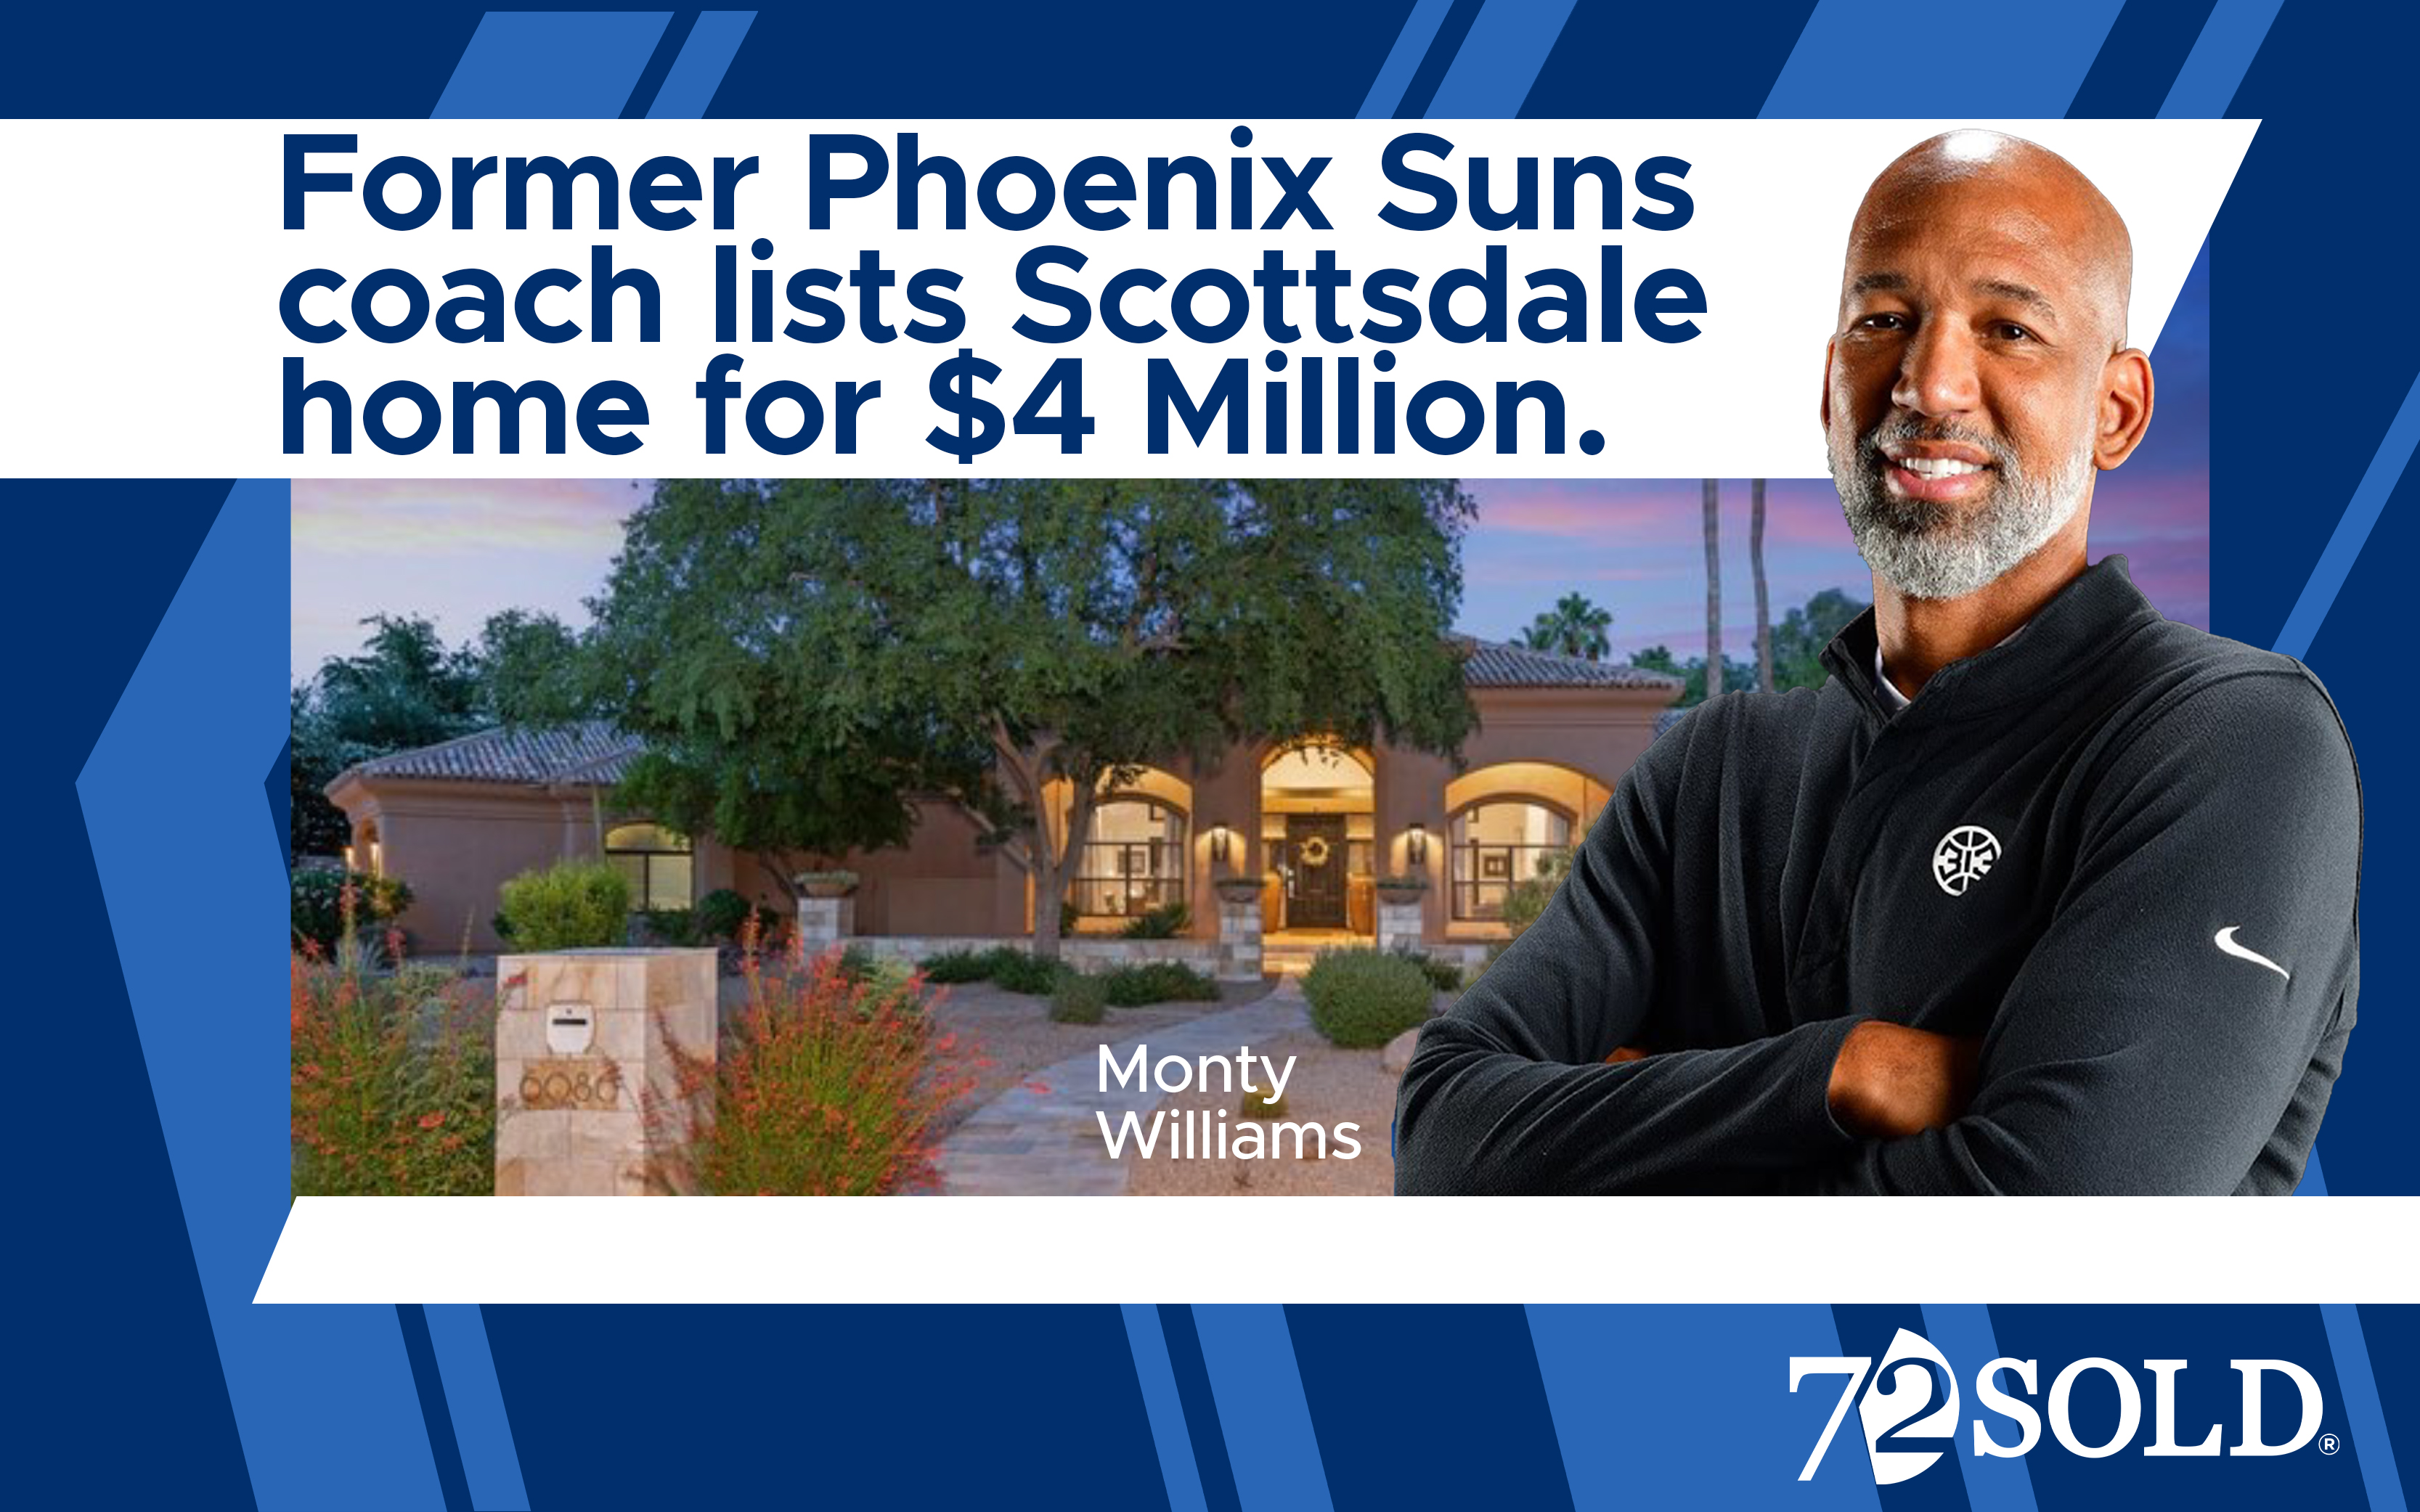 Monty Williams lists with 72SOLD